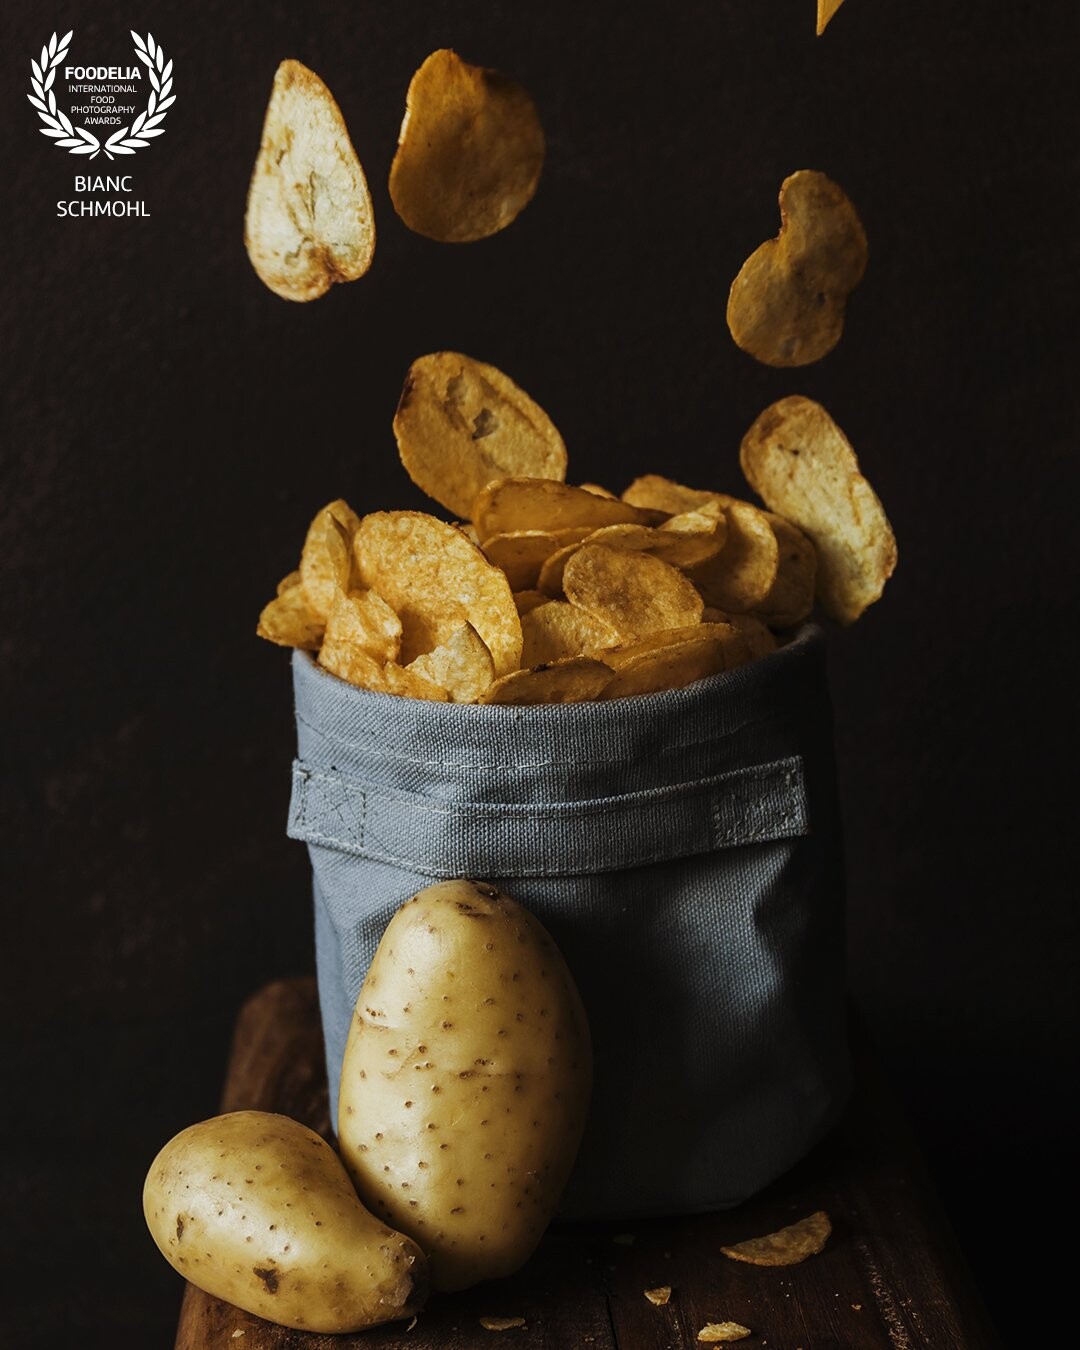 Such a nice treat: eating crispy potatoe chips while watching a movie or series. Snacks in motion! Hence the details with the fresh potatoes in front.